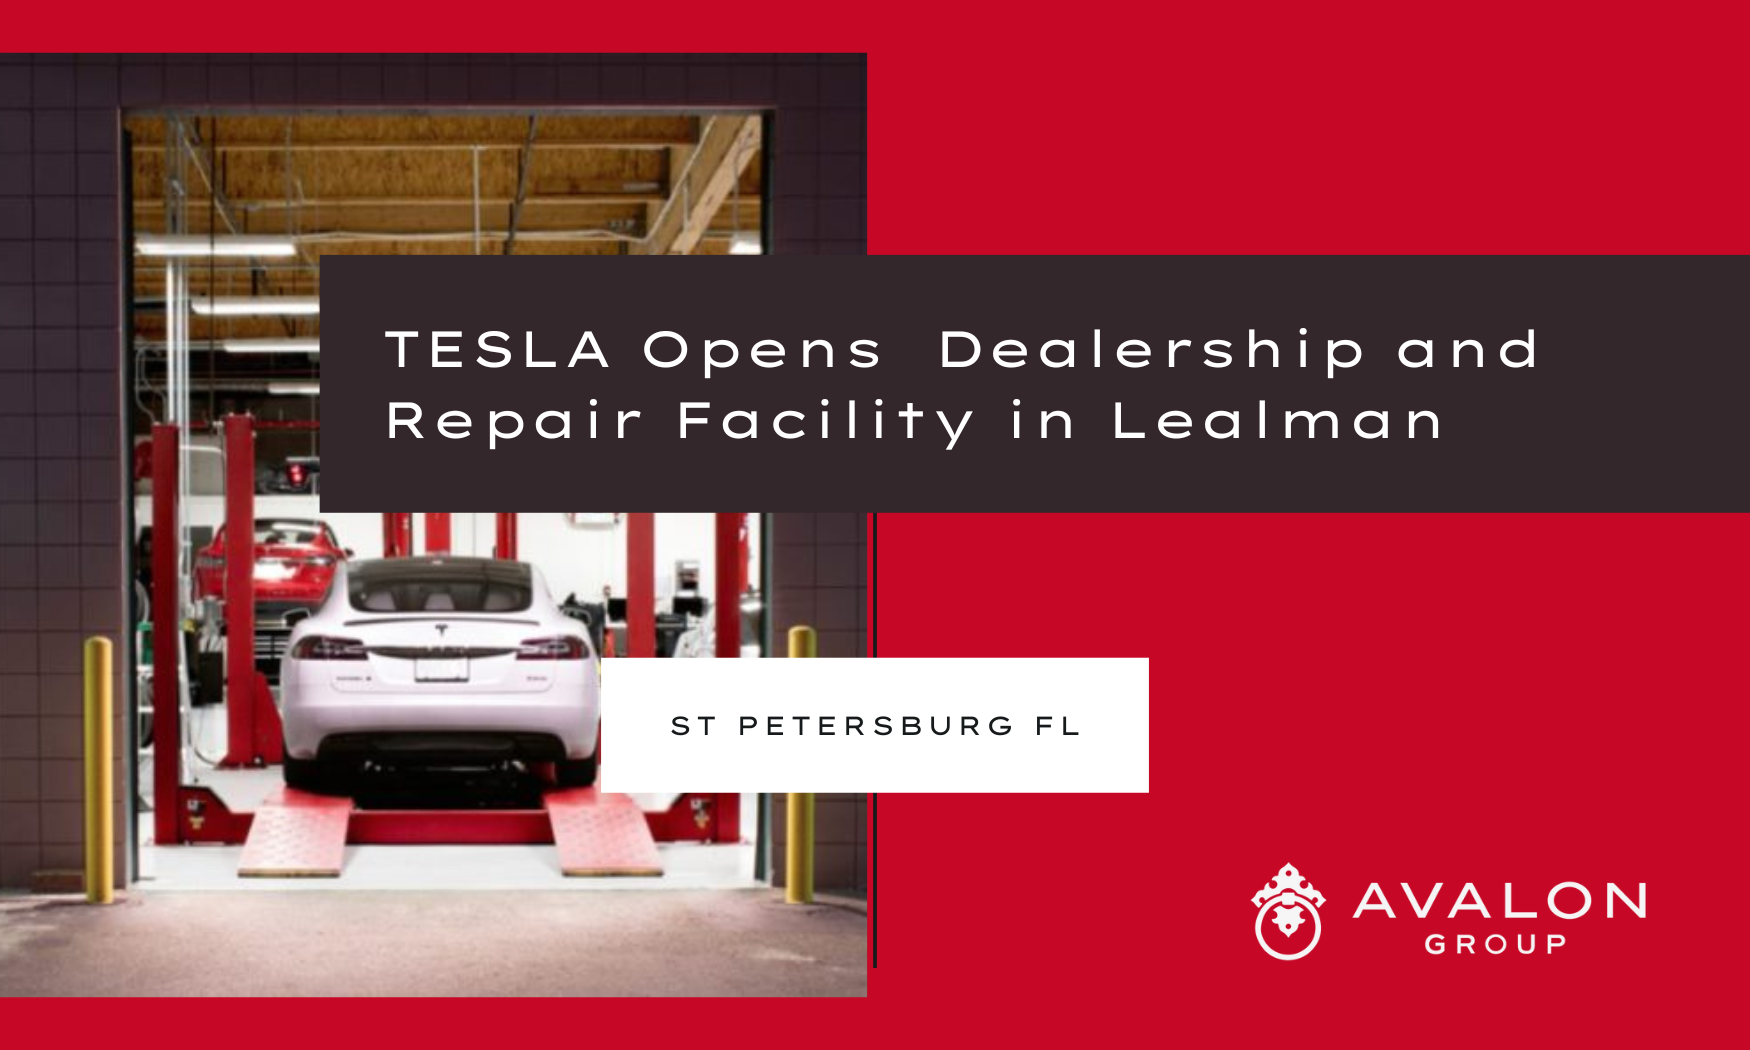 Tesla Motors St Petersburg cover picture shows a Tesla being repaired in a garage.